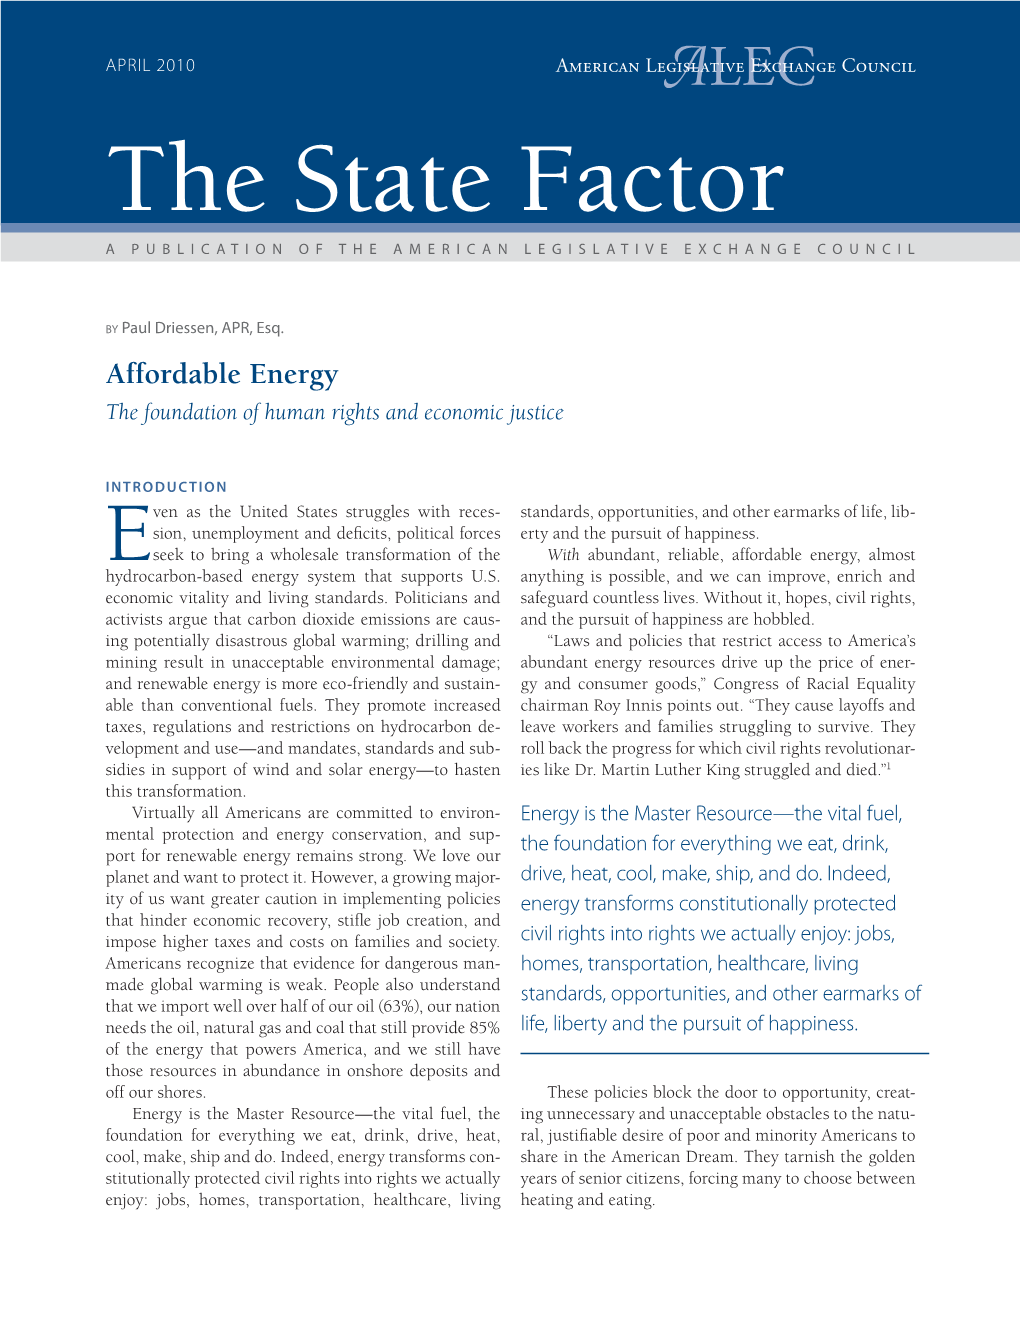 The State Factor a PUBLICATION of the AMERICAN LEGISLATIVE EXCHANGE COUNCIL